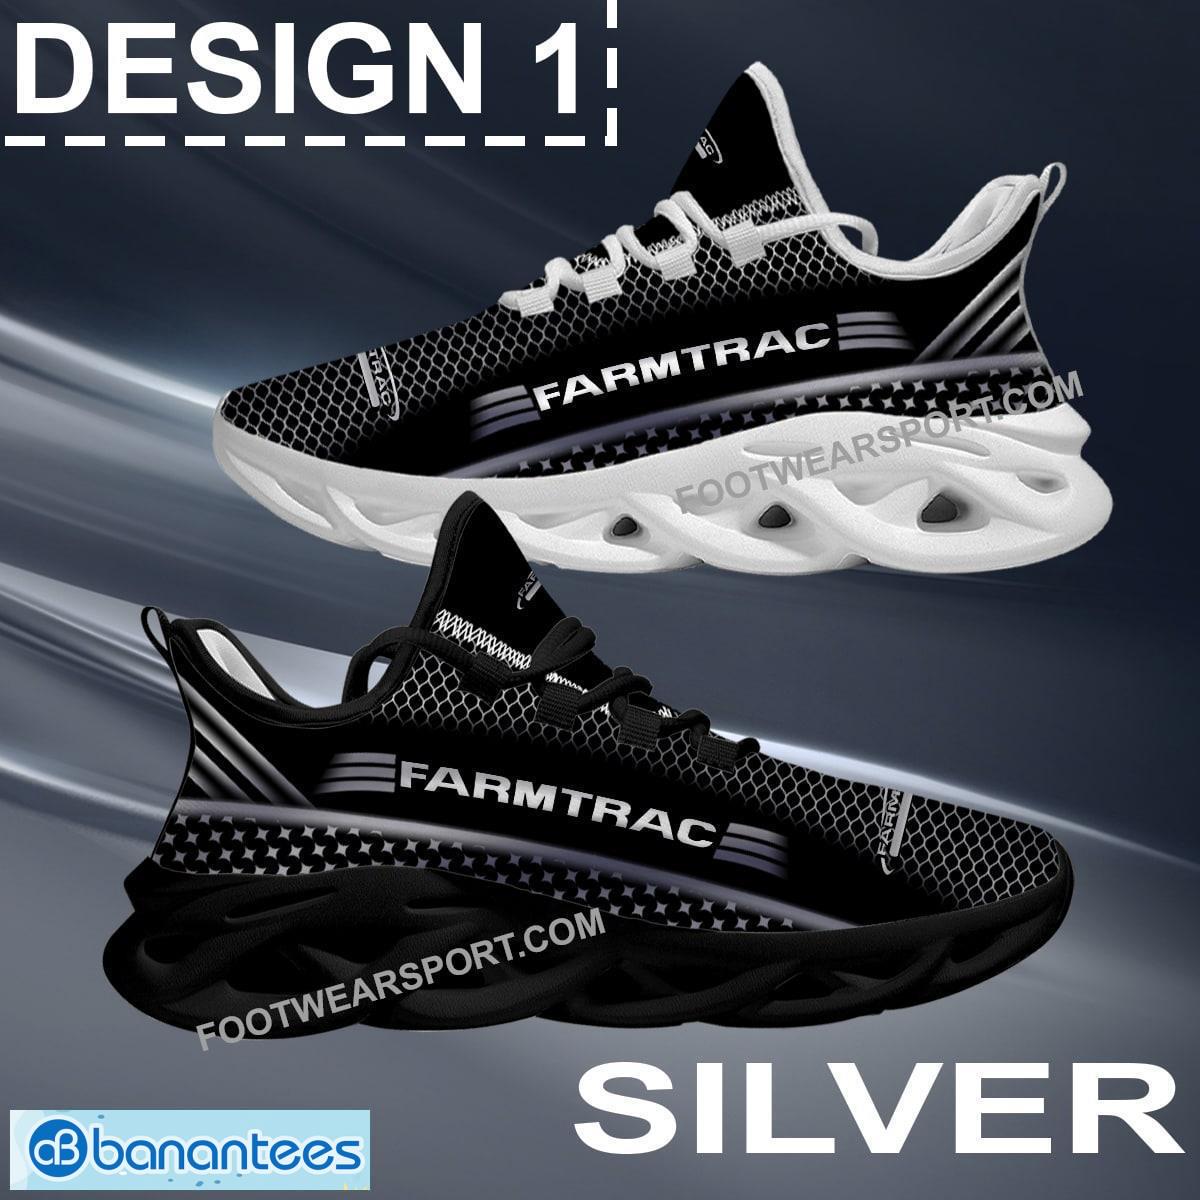 Farmtrac Tractor Max Soul Shoes Gold, Diamond, Silver All Over Print Sign Sport Sneaker Gift - Car Farmtrac Tractor Max Soul Shoes Style 1